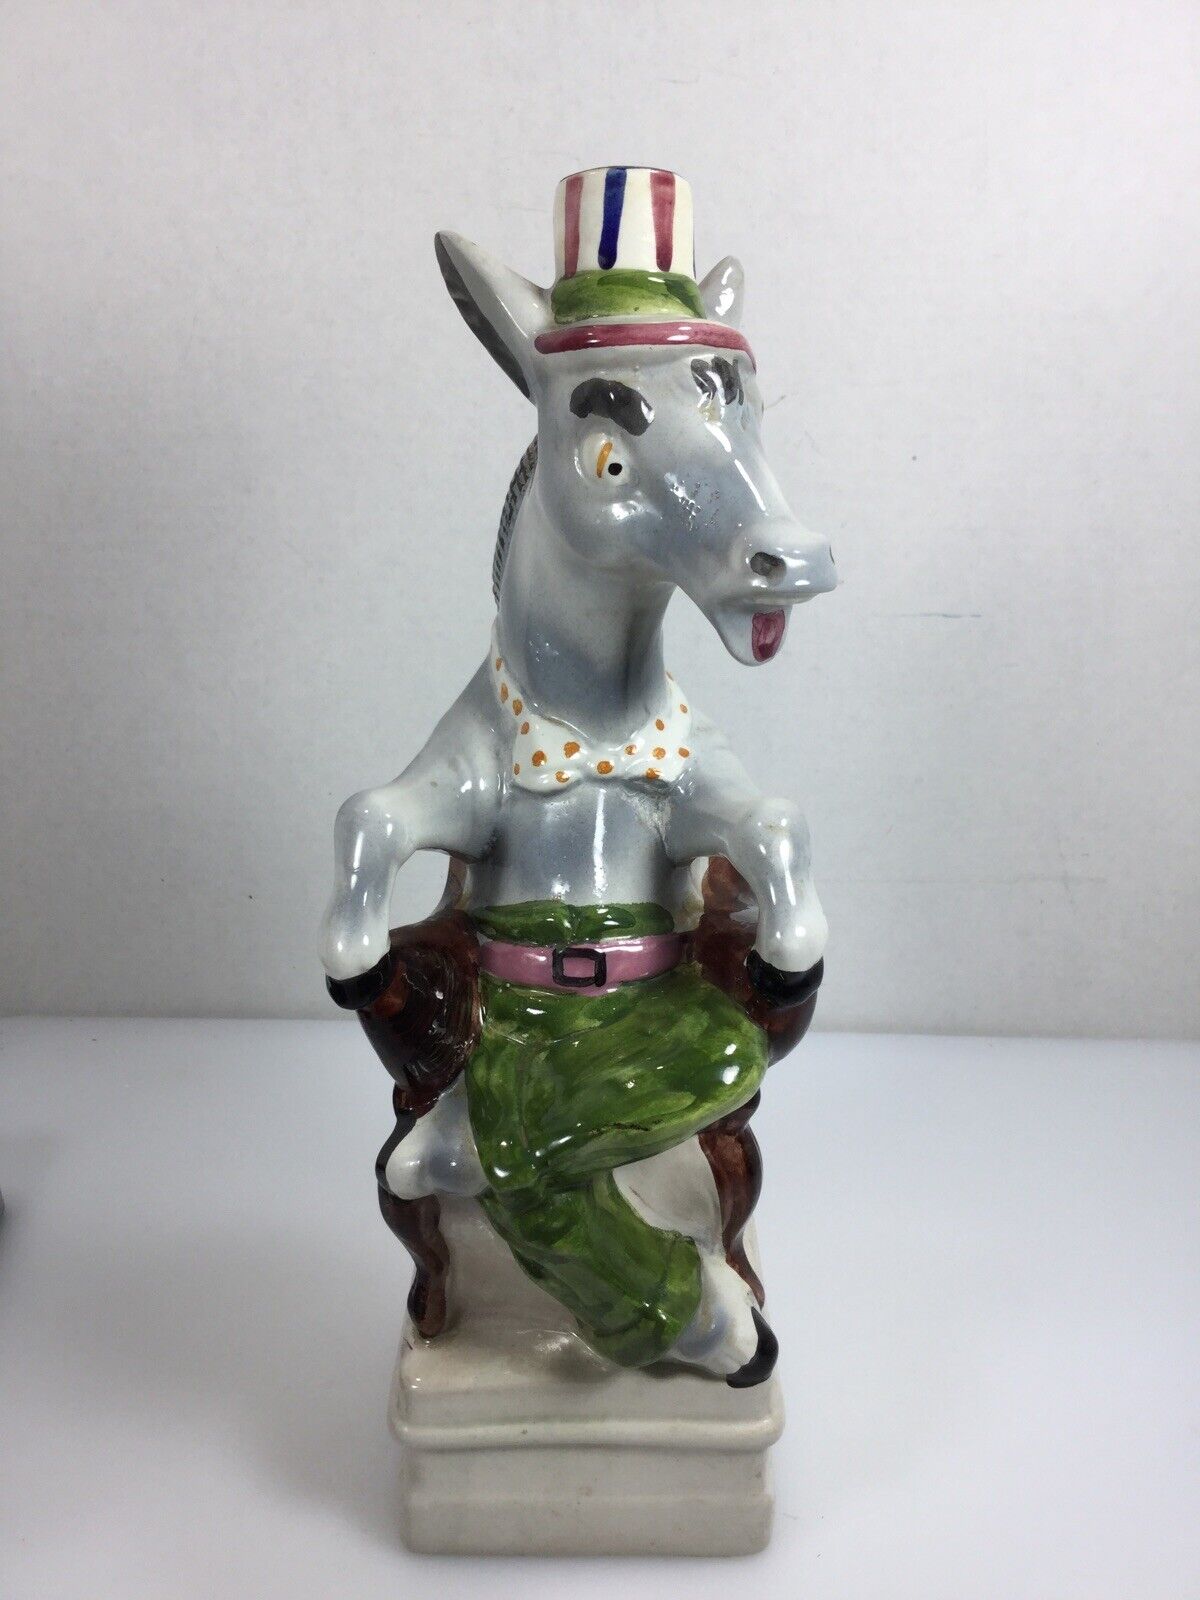 Vintage Donkey decanter by C.A.S.A. Cameri Novara made in Italy